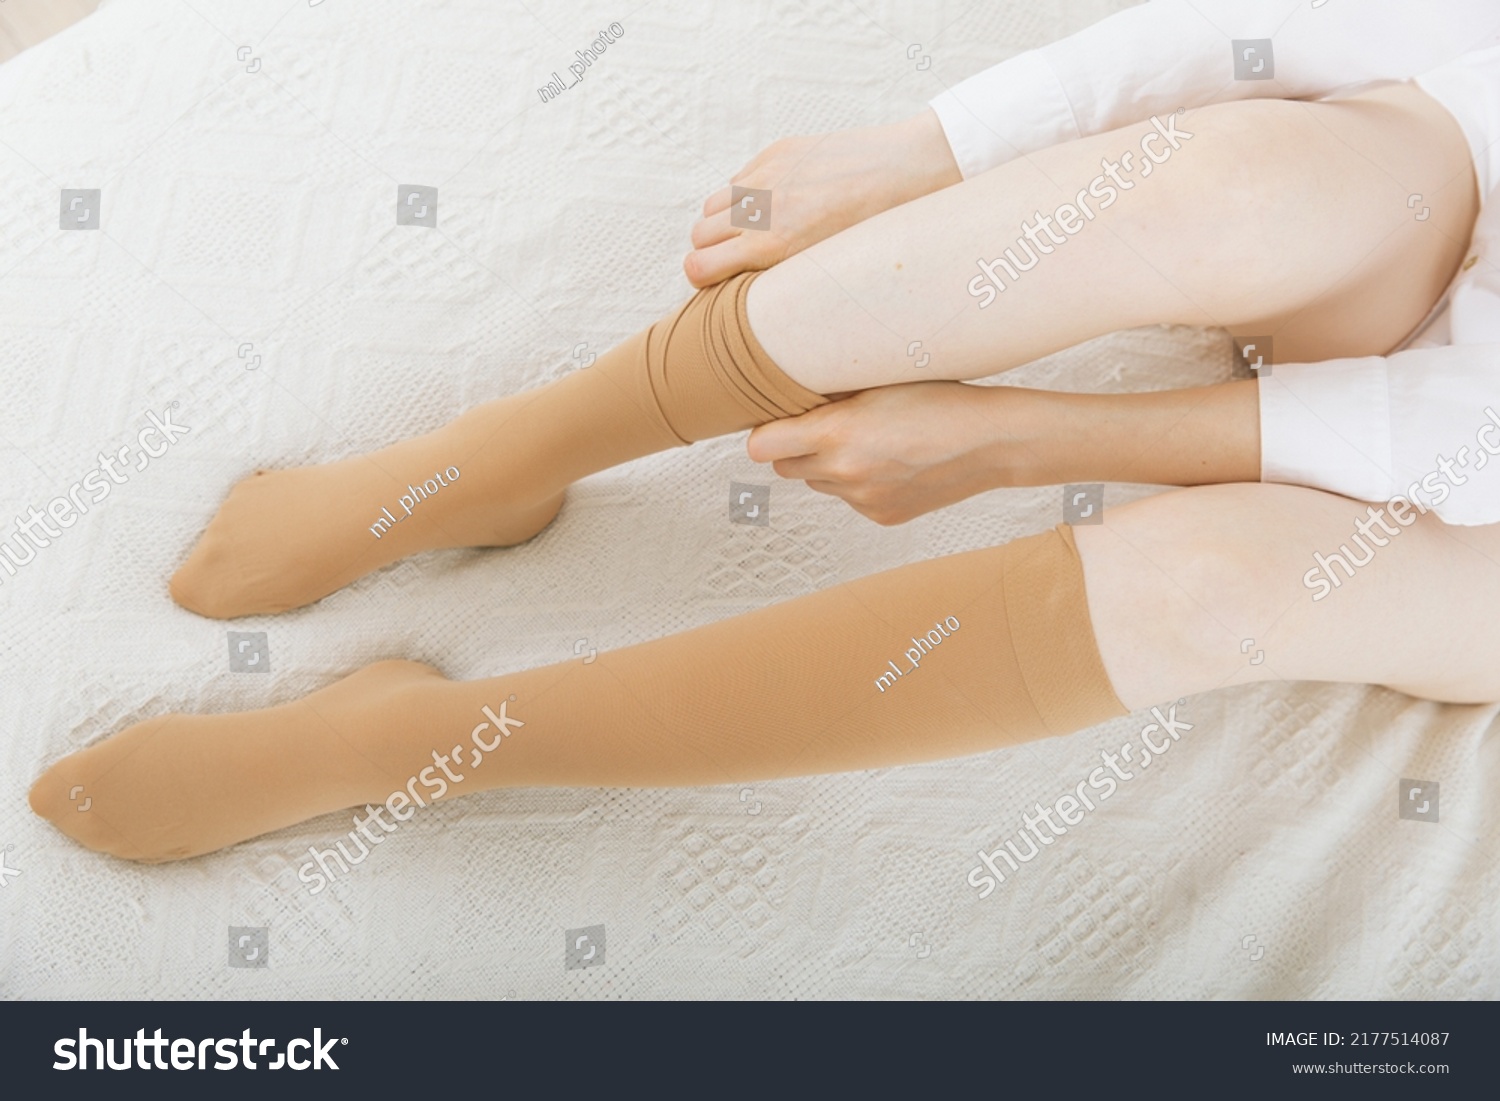 Knee socks or socks. Beige compression stockings on a woman in a white room. Girl putting on stockings at home. Beautiful female legs. #2177514087